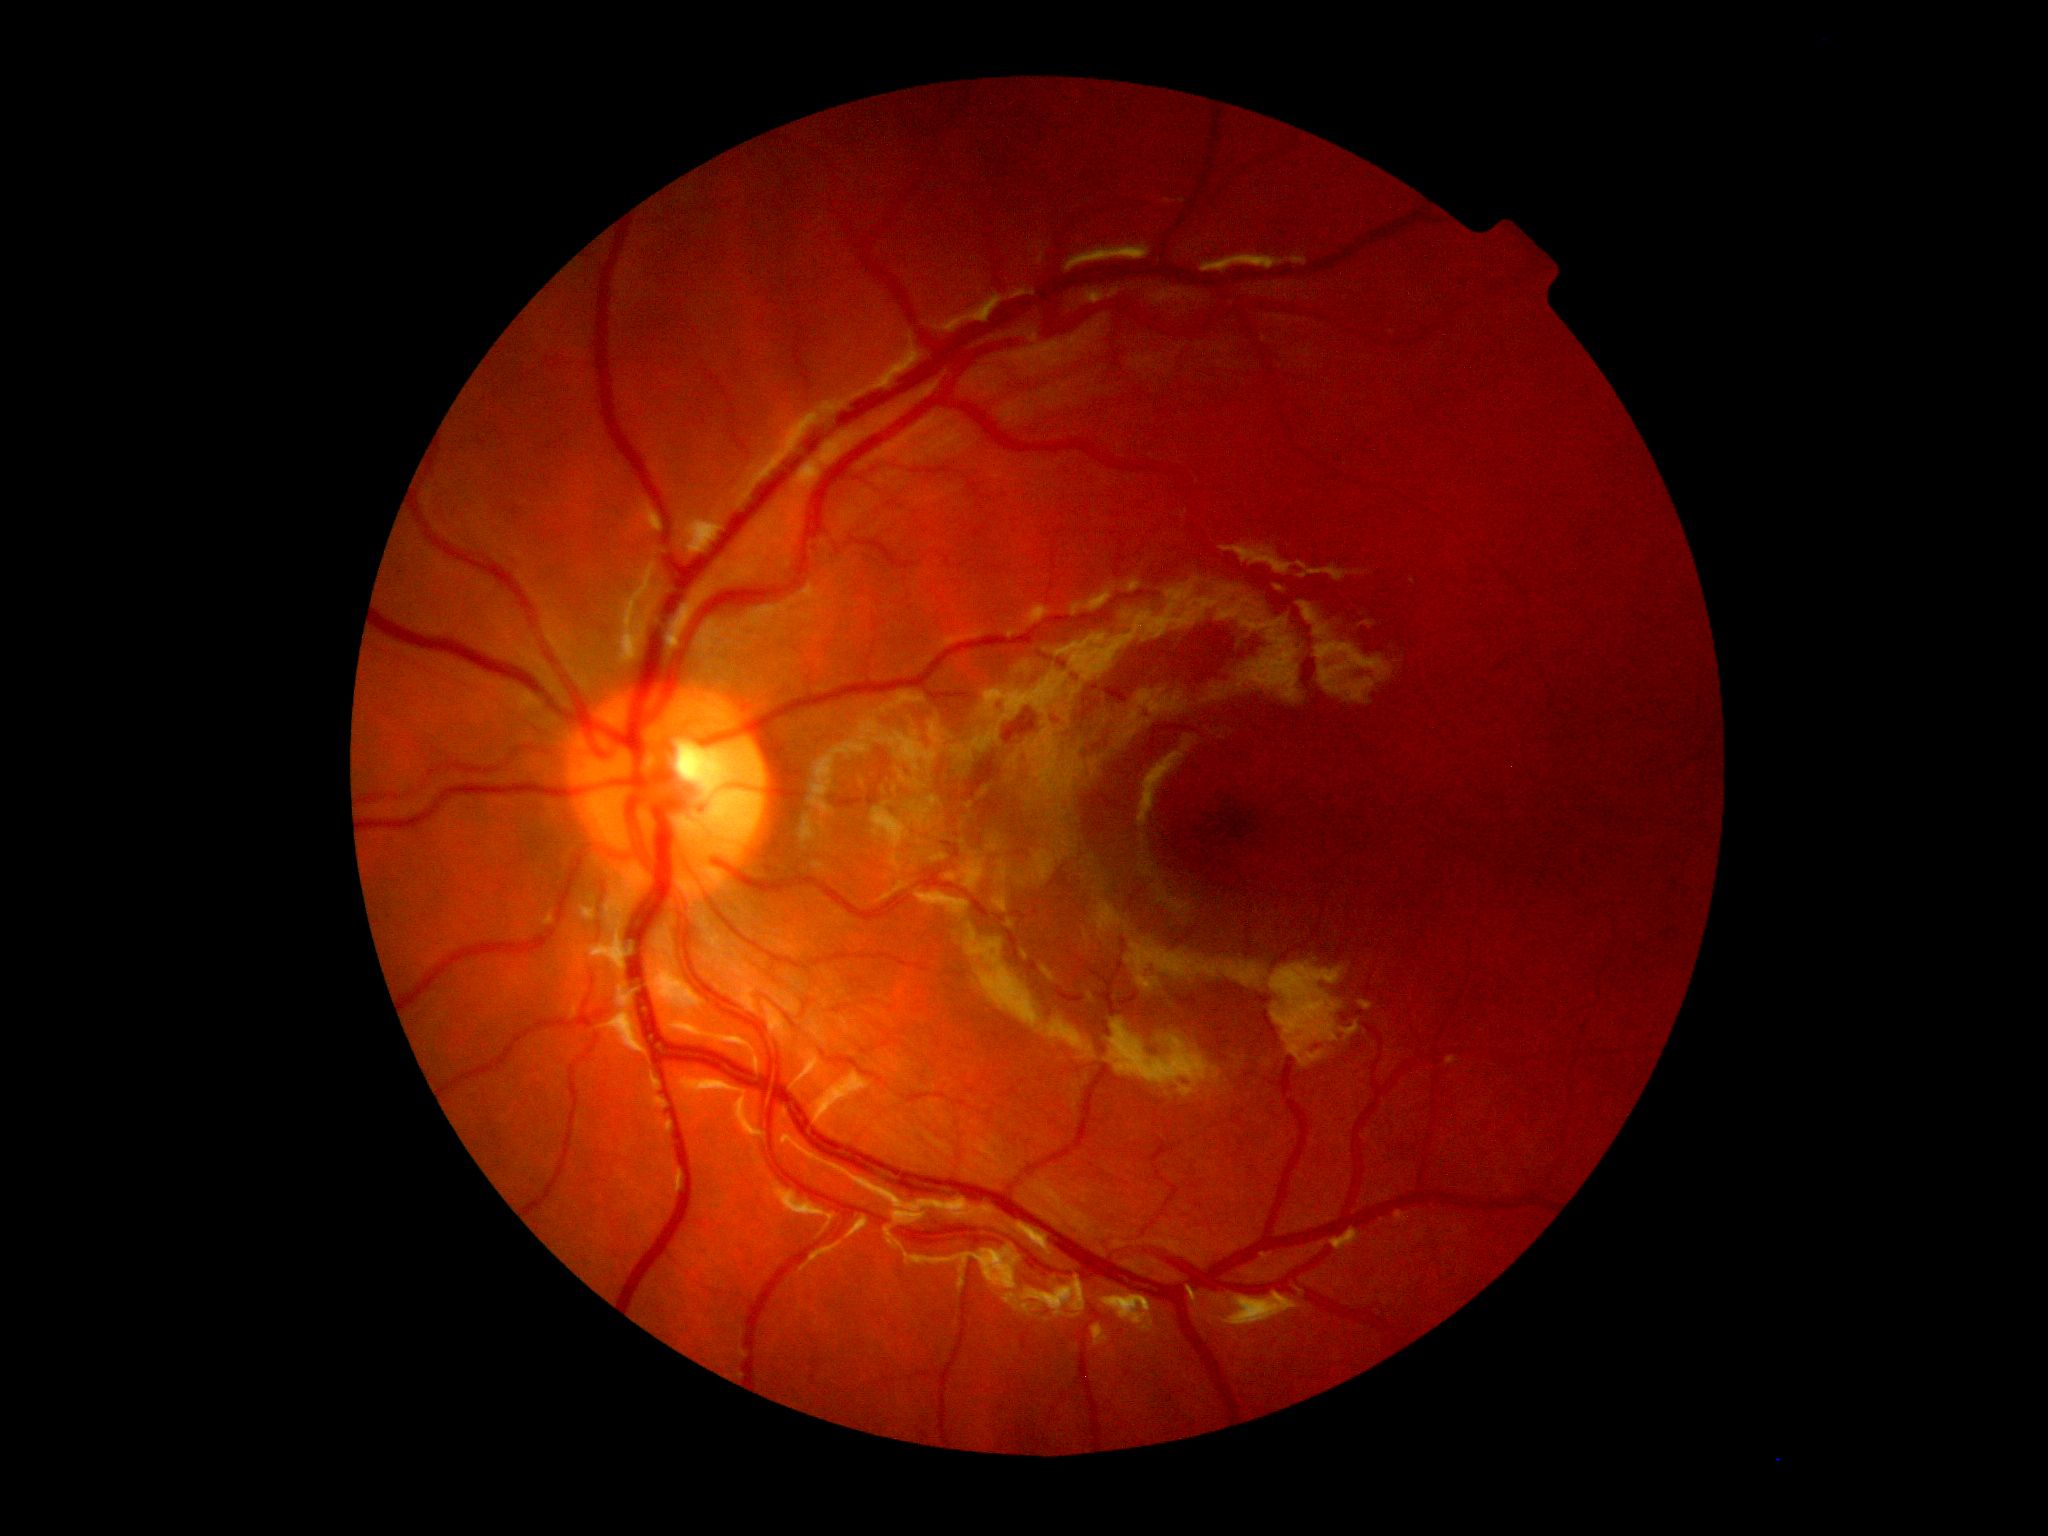 4-year-old patient retinal scan with suspected Coats disease